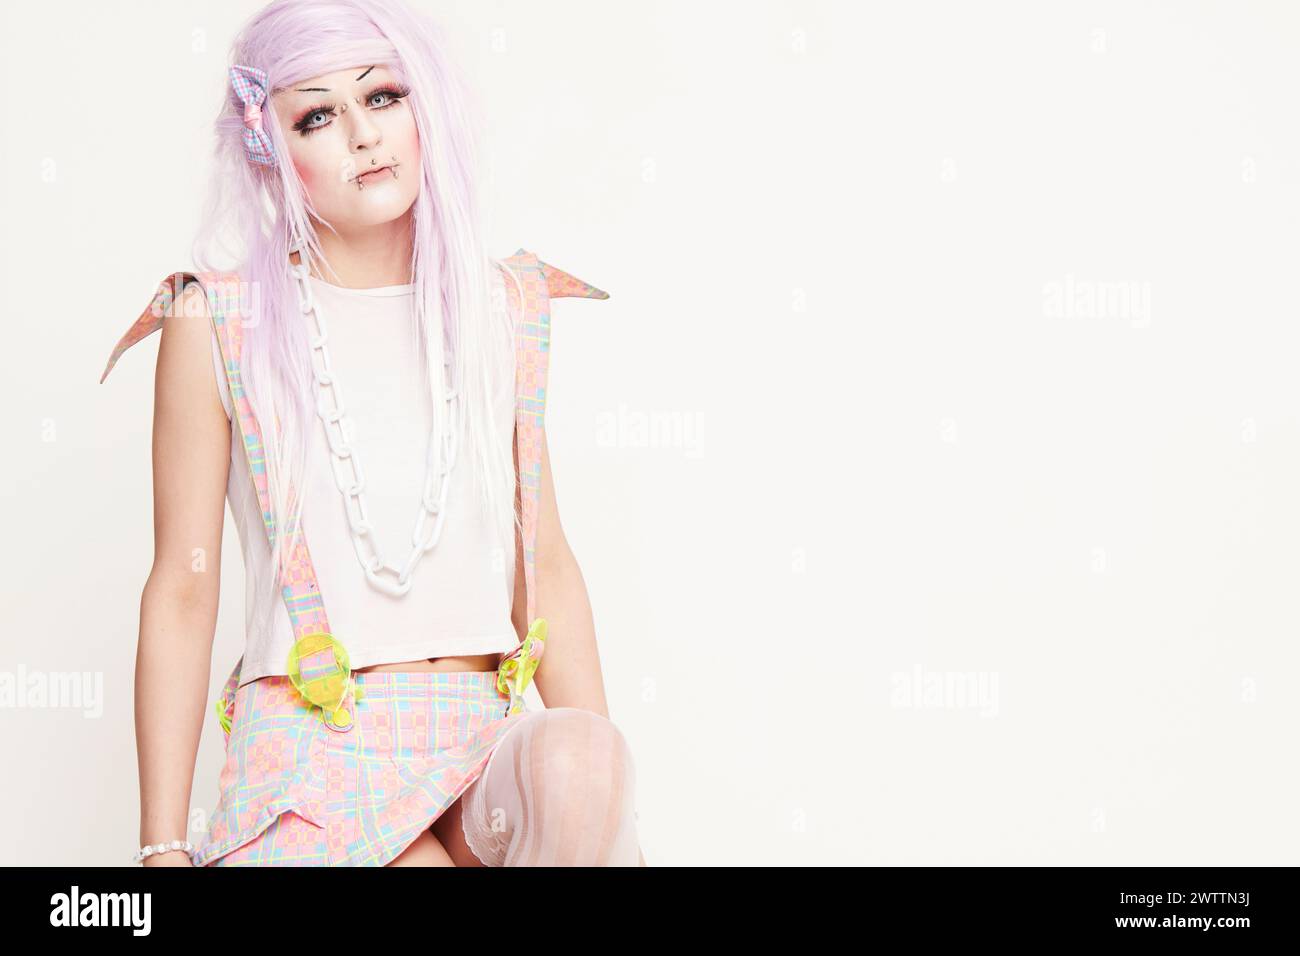 Woman in colorful attire with pastel hair Stock Photo